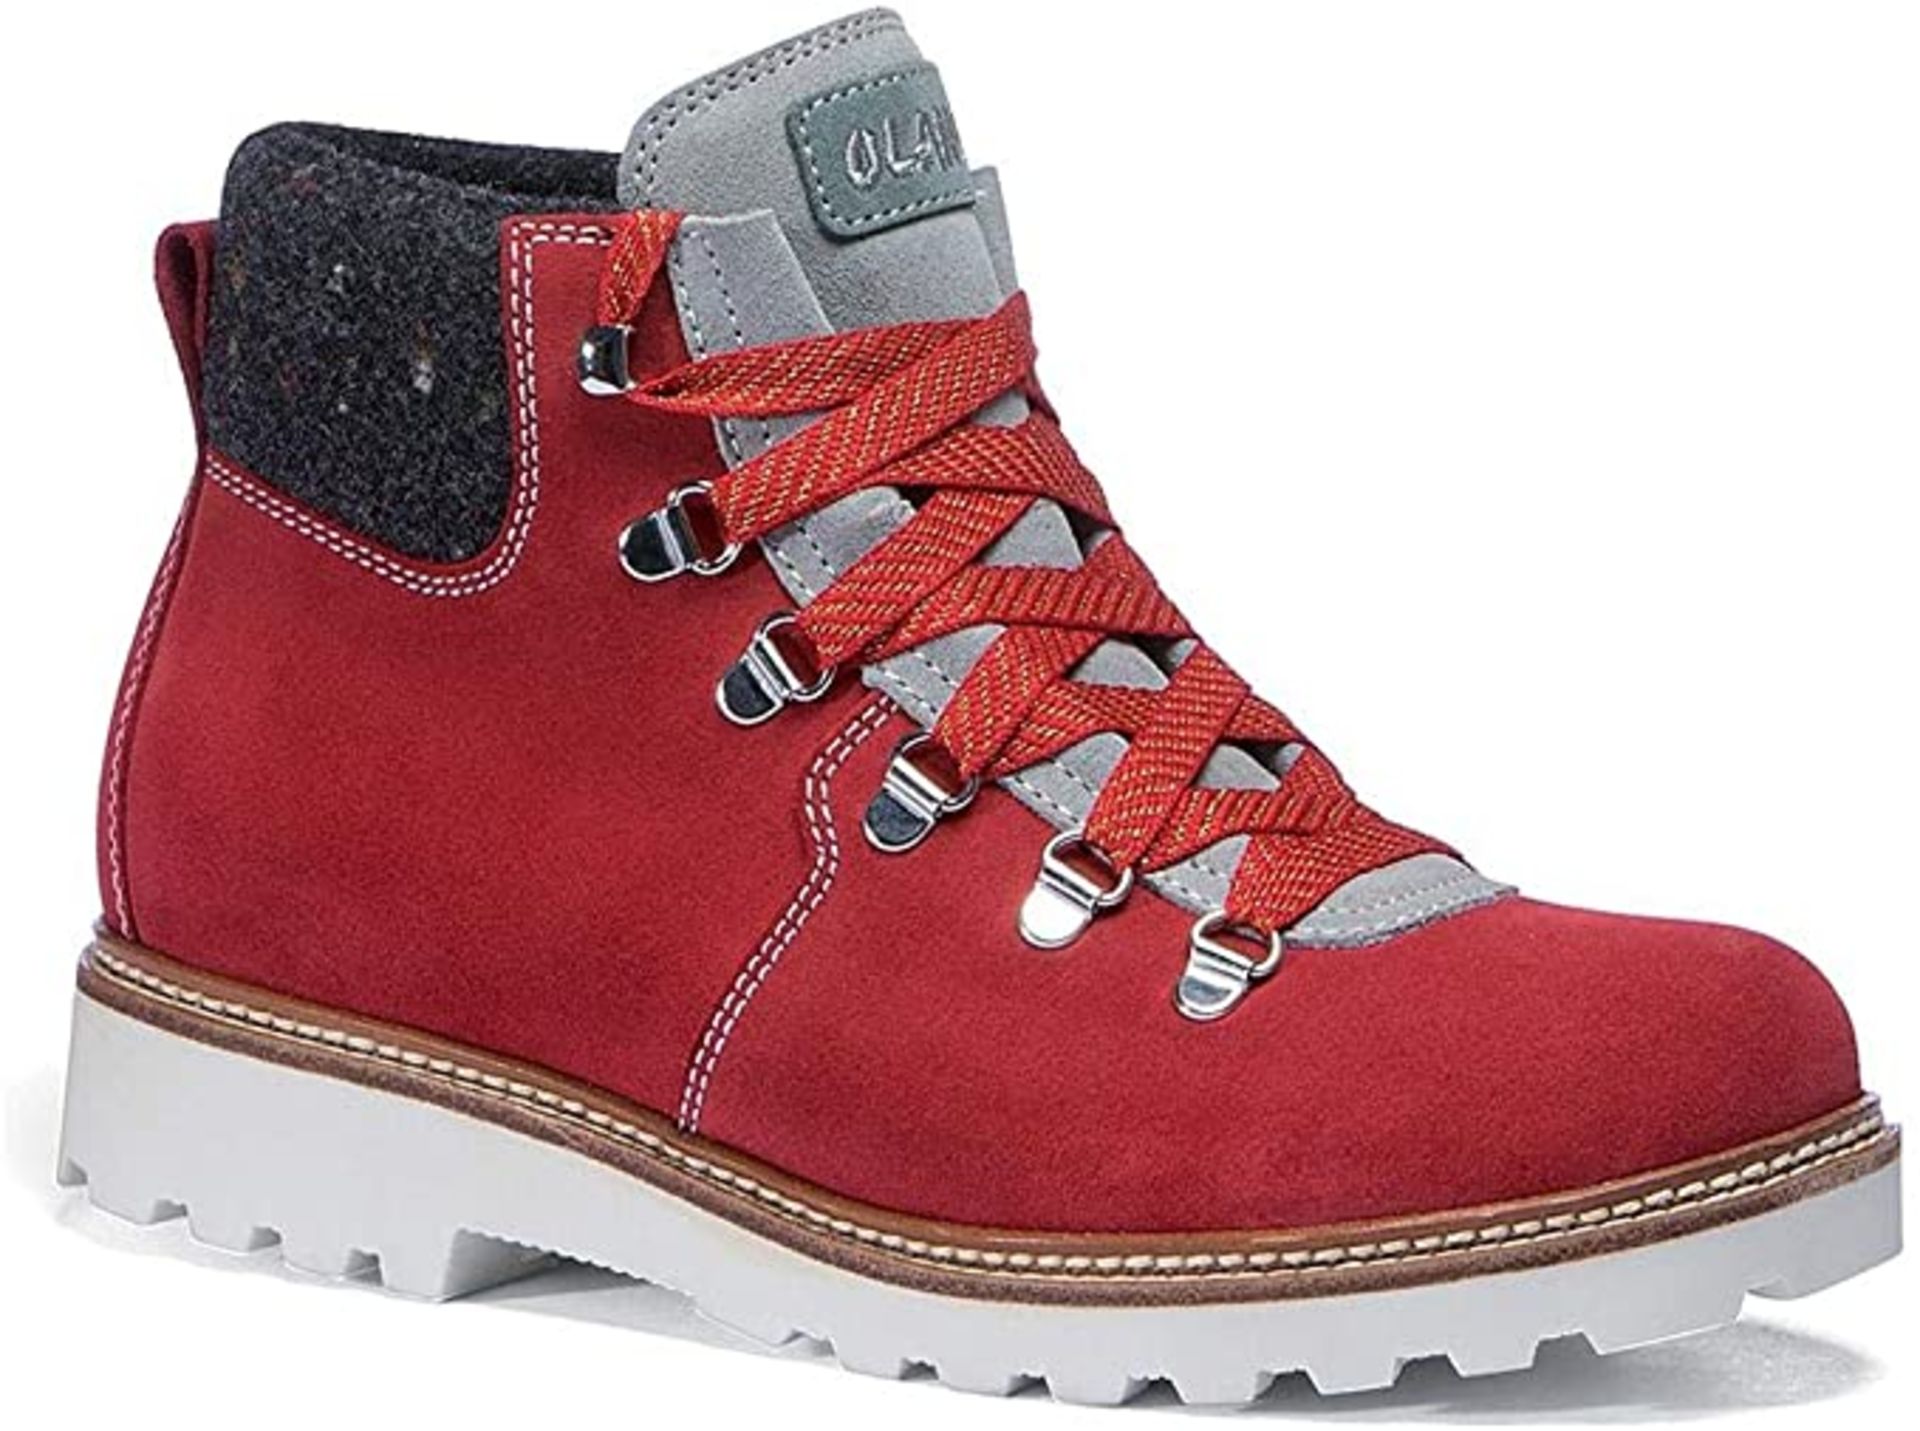 1 x Pair of Designer Olang Merano BTX 815 Rosso Women's Winter Boots - Euro Size 40 - Brand New - Image 4 of 4